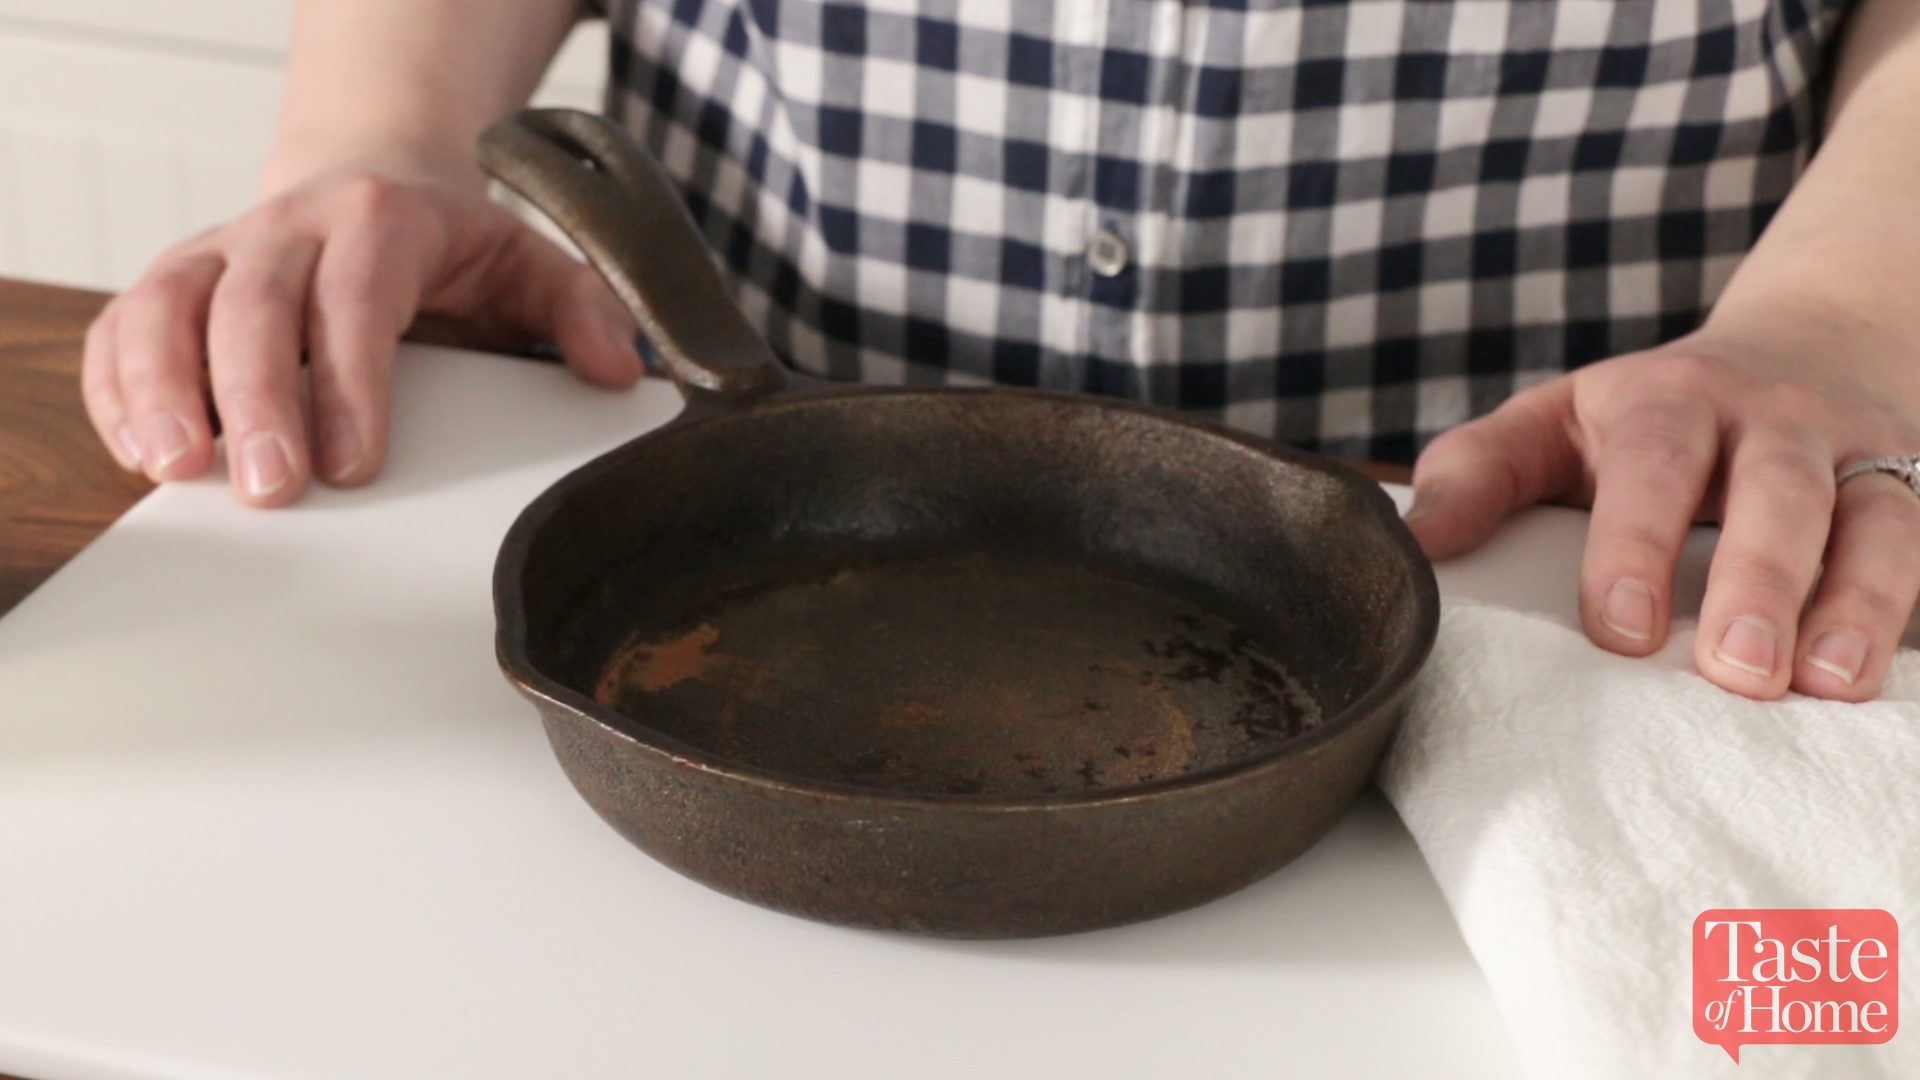 4 Things You Should Never Cook In A Cast-Iron Skillet